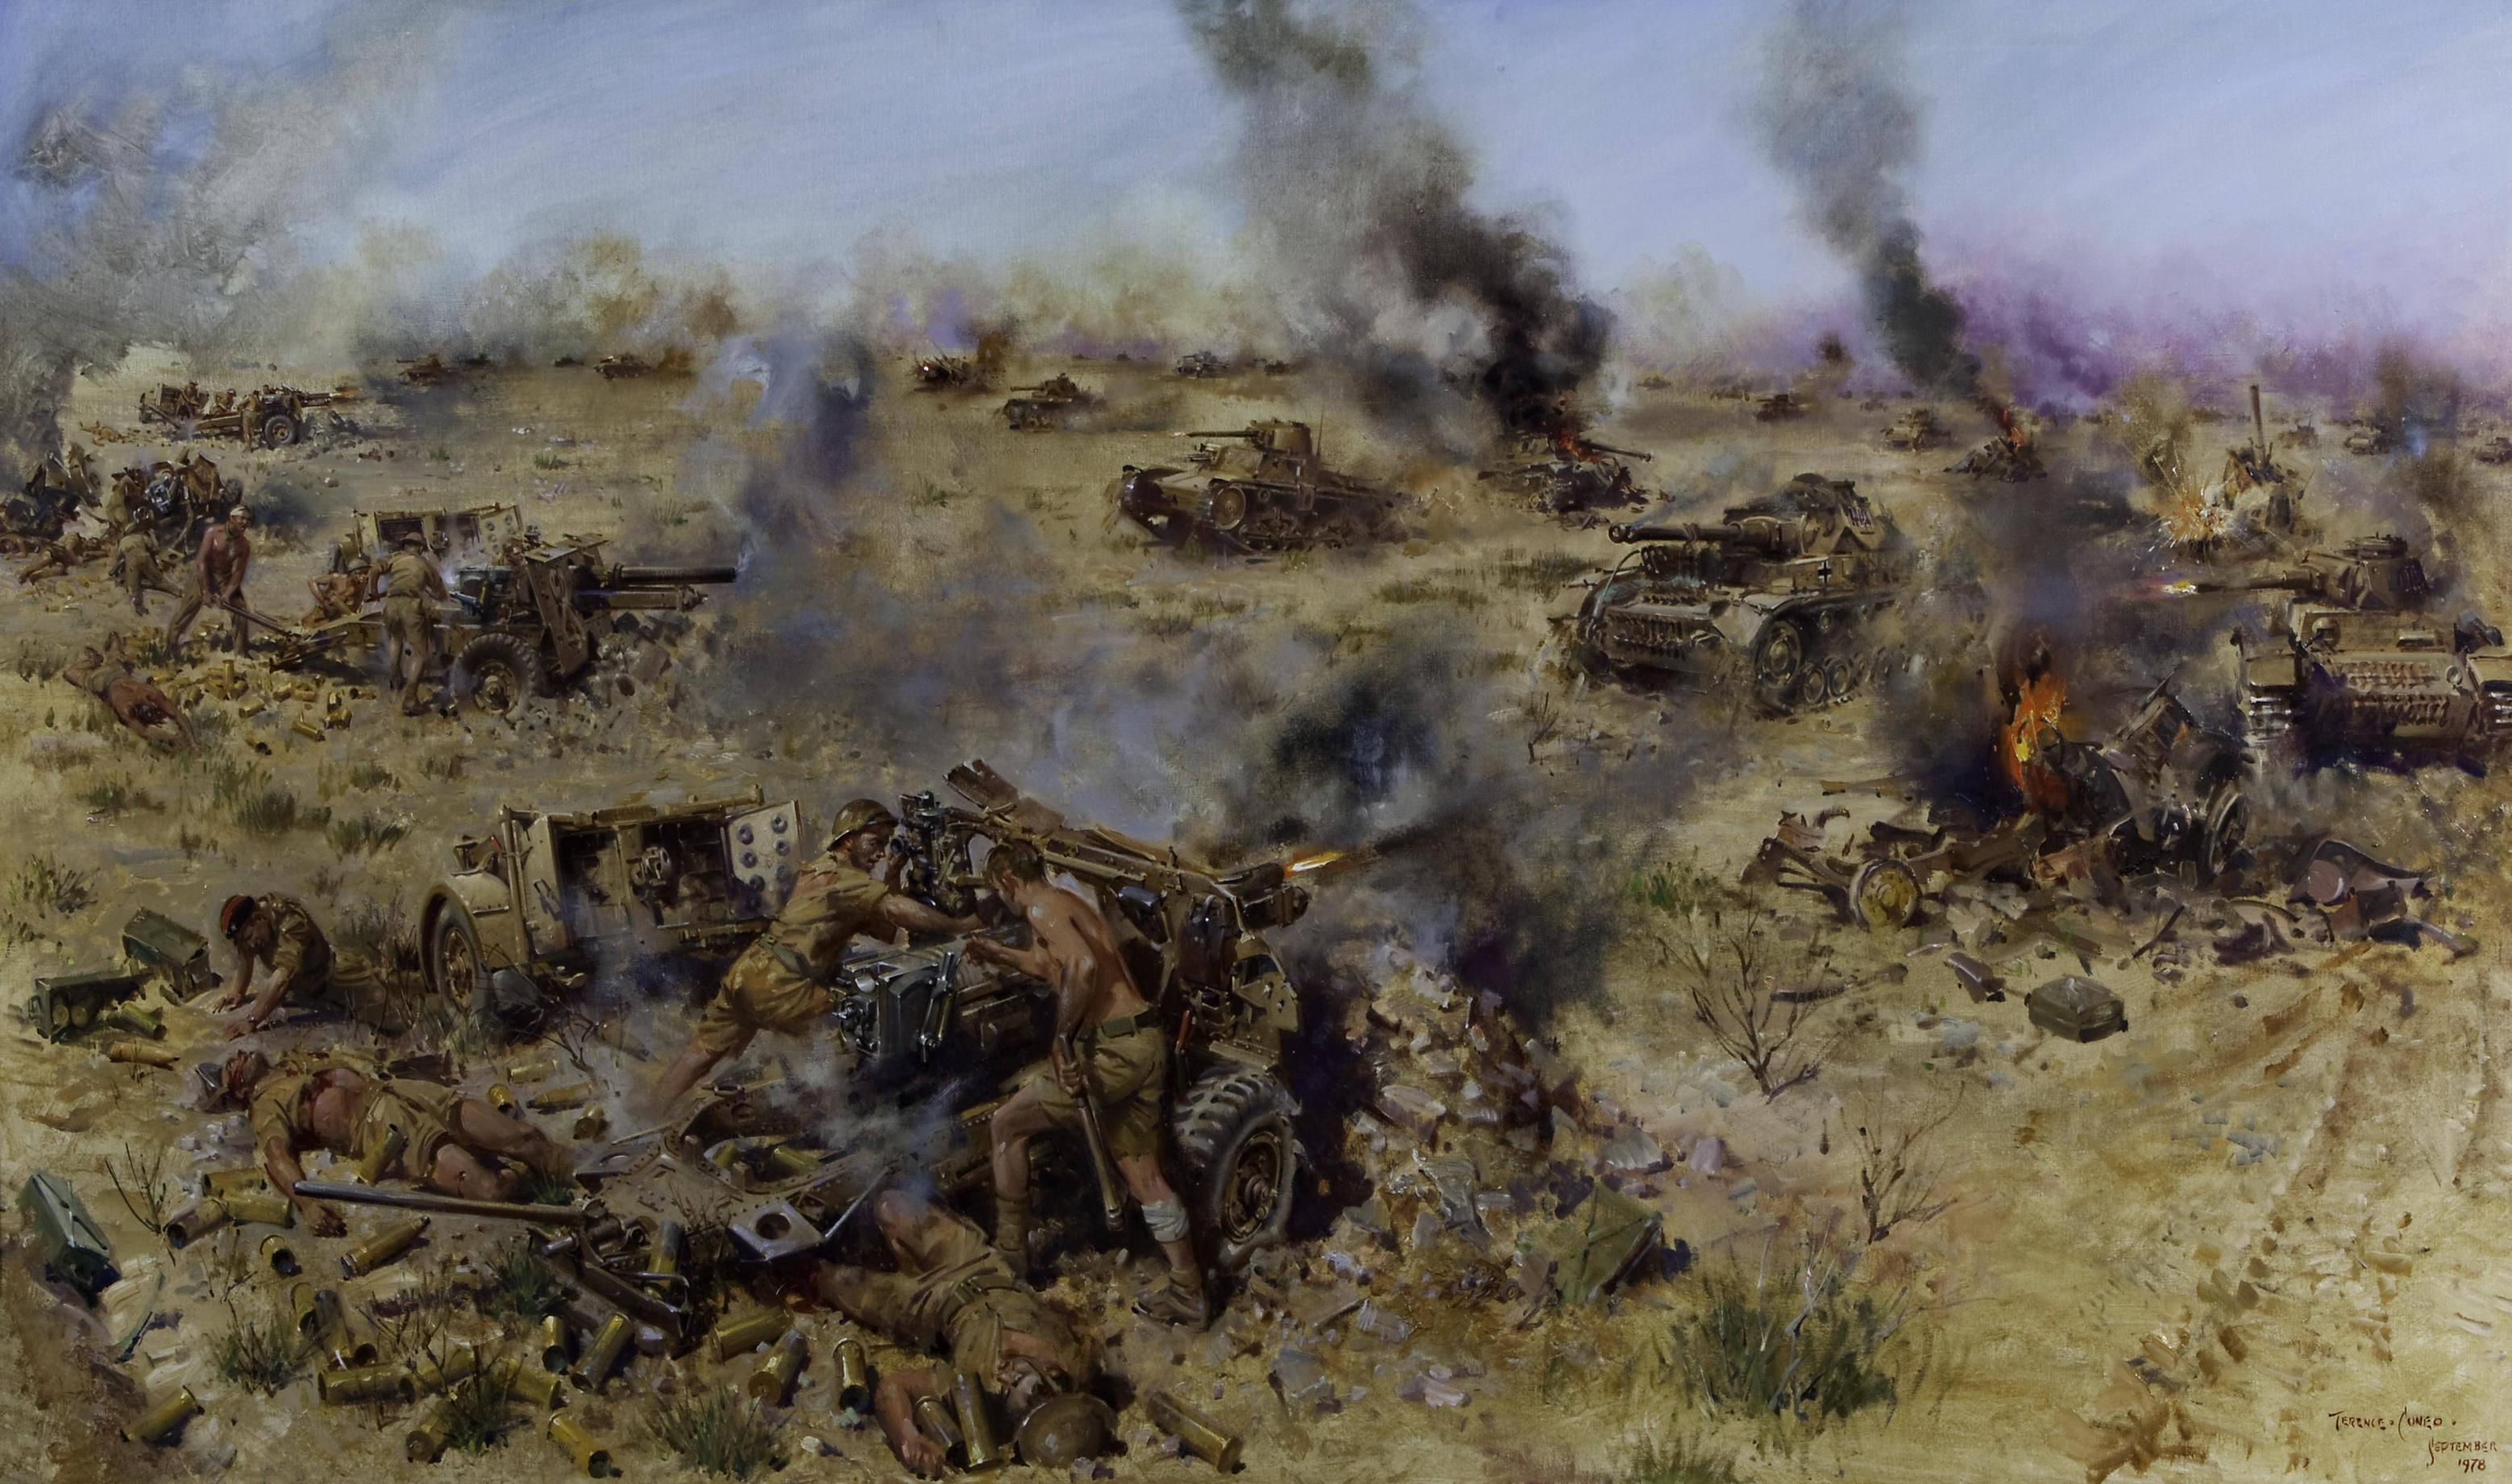 Battle Of Gazala by Terence Cuneo